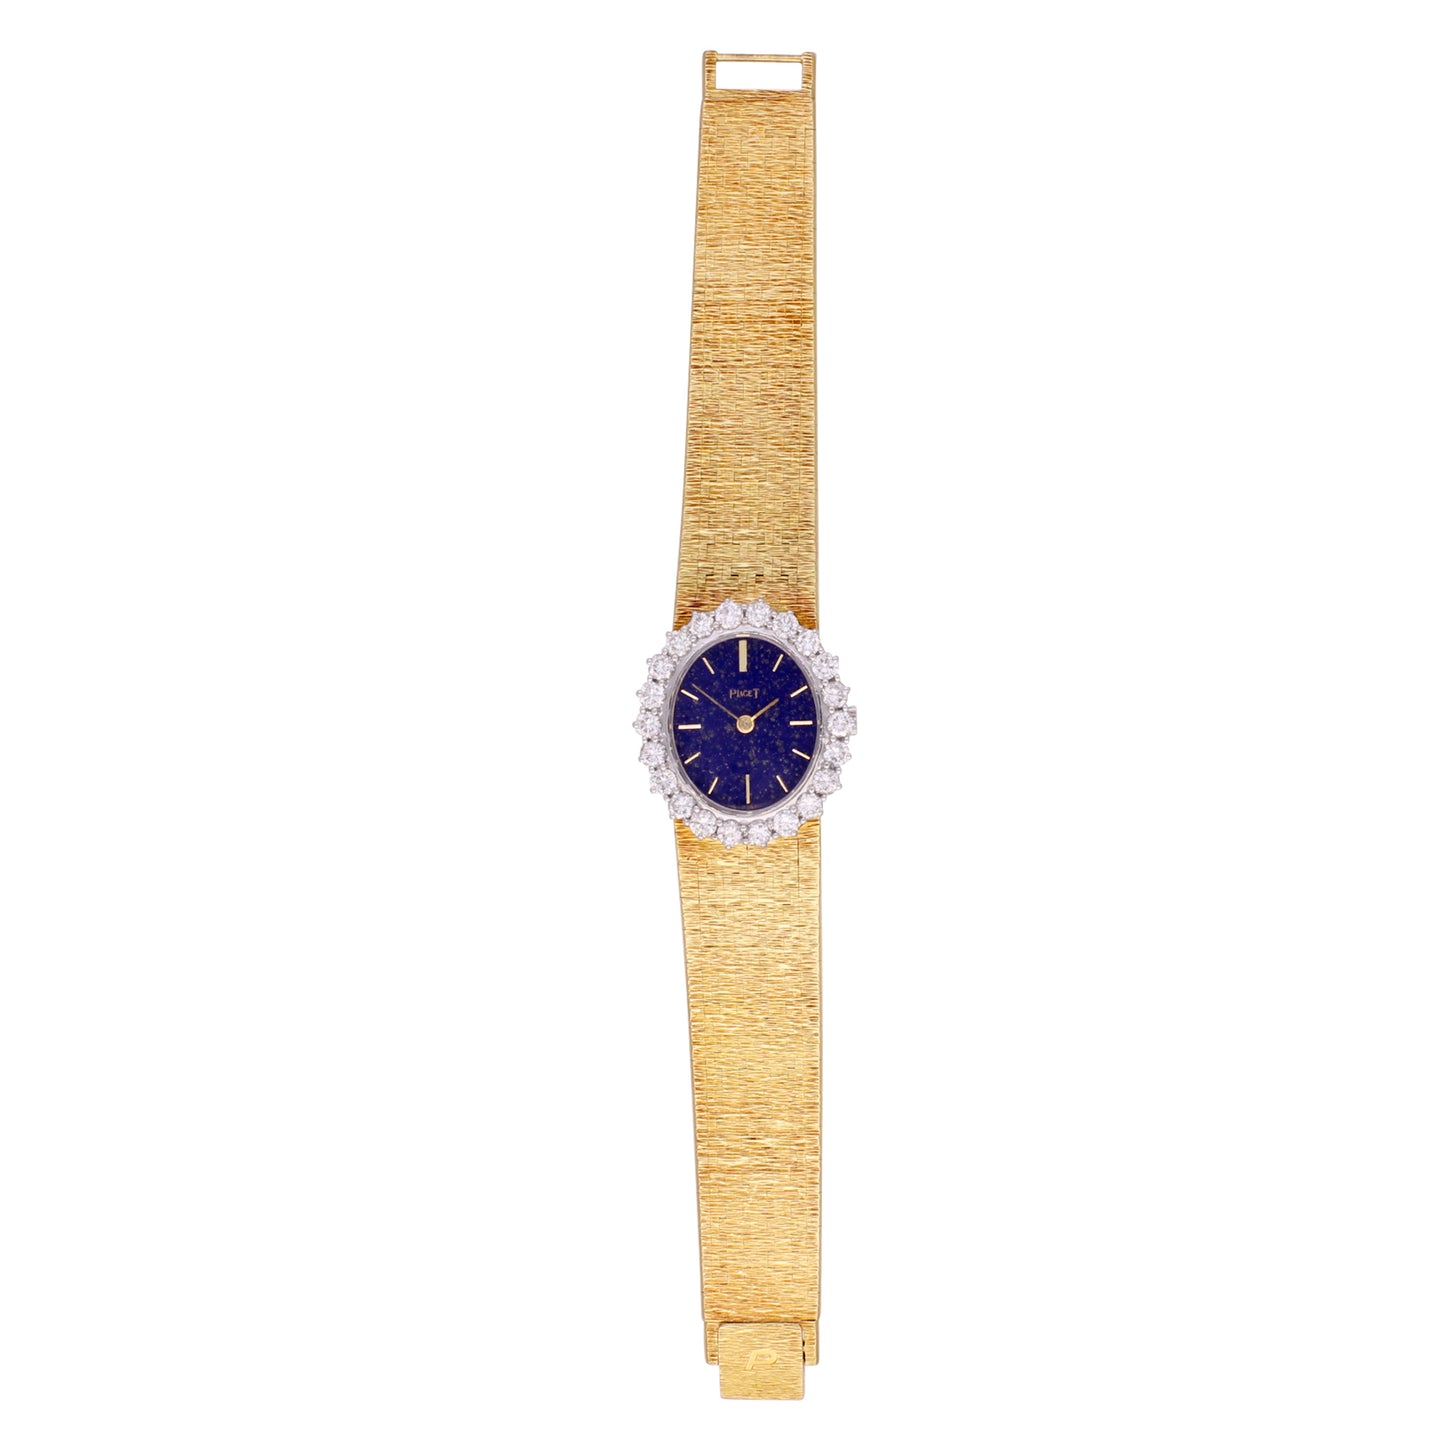 18ct yellow gold Piaget, reference 9338 bracelet watch with lapis lazuli dial and diamond set bezel. Made 1970's